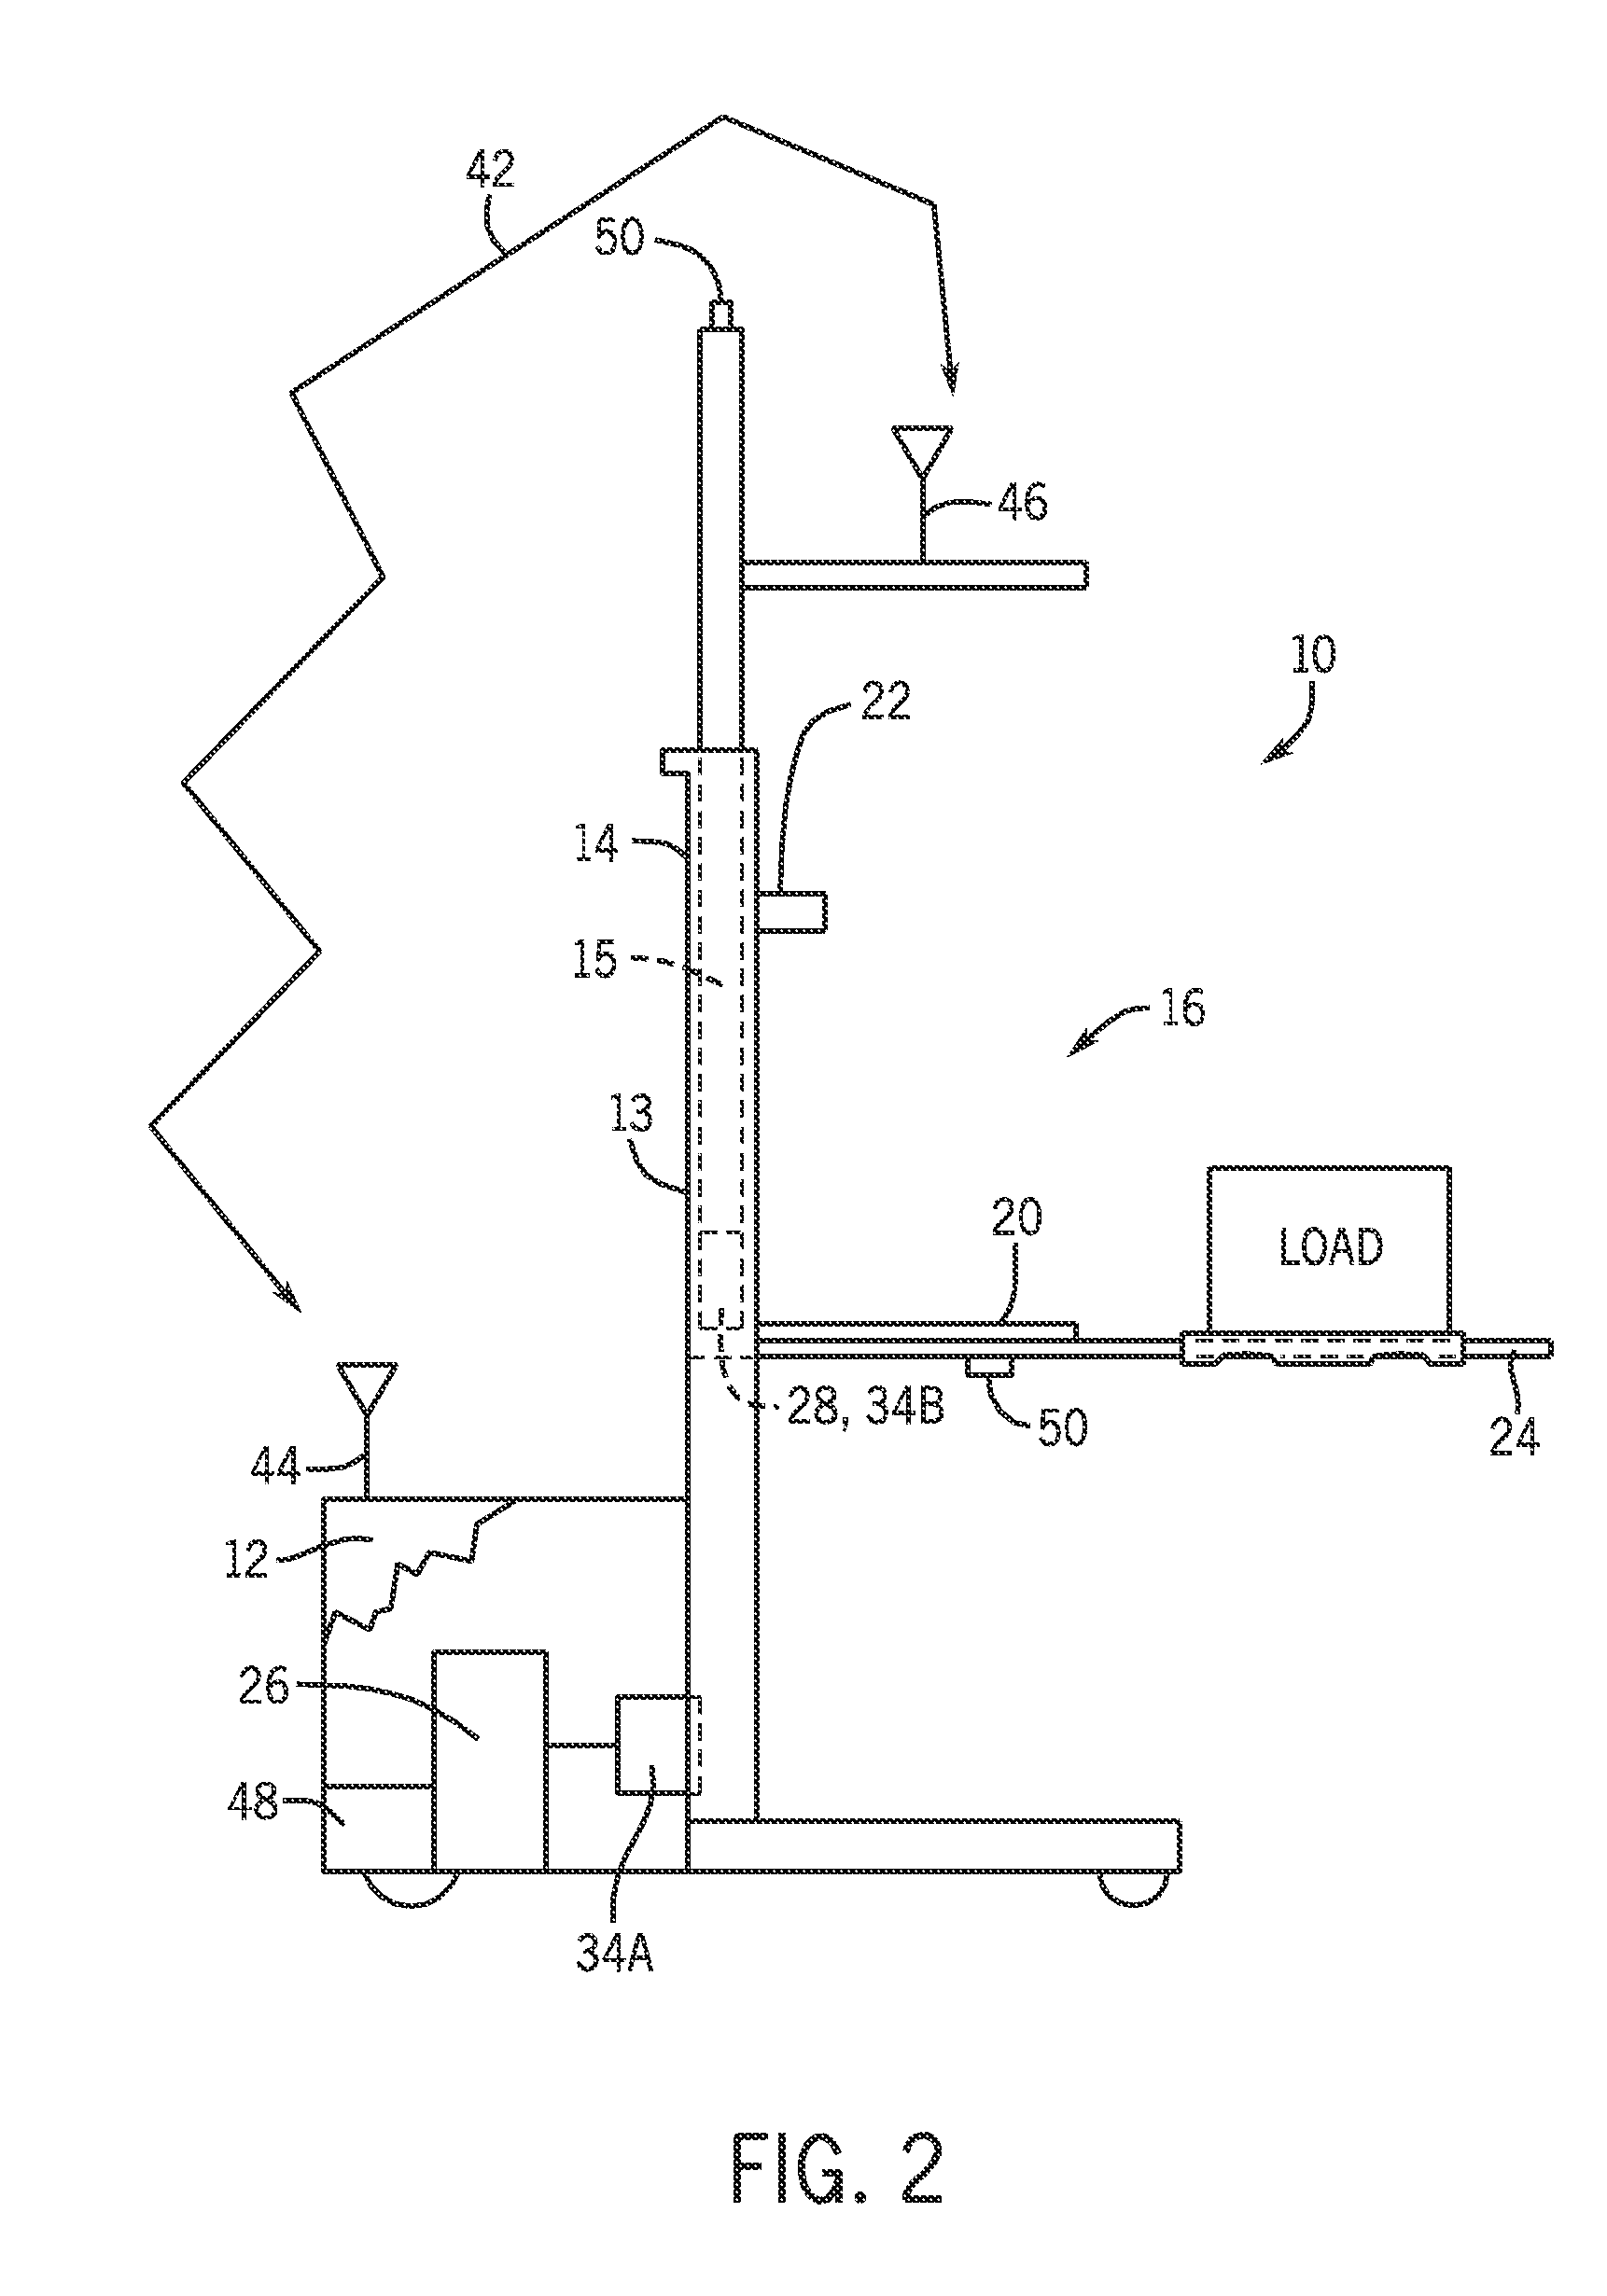 Energy Storage on an Elevated Platform and Transfer Method